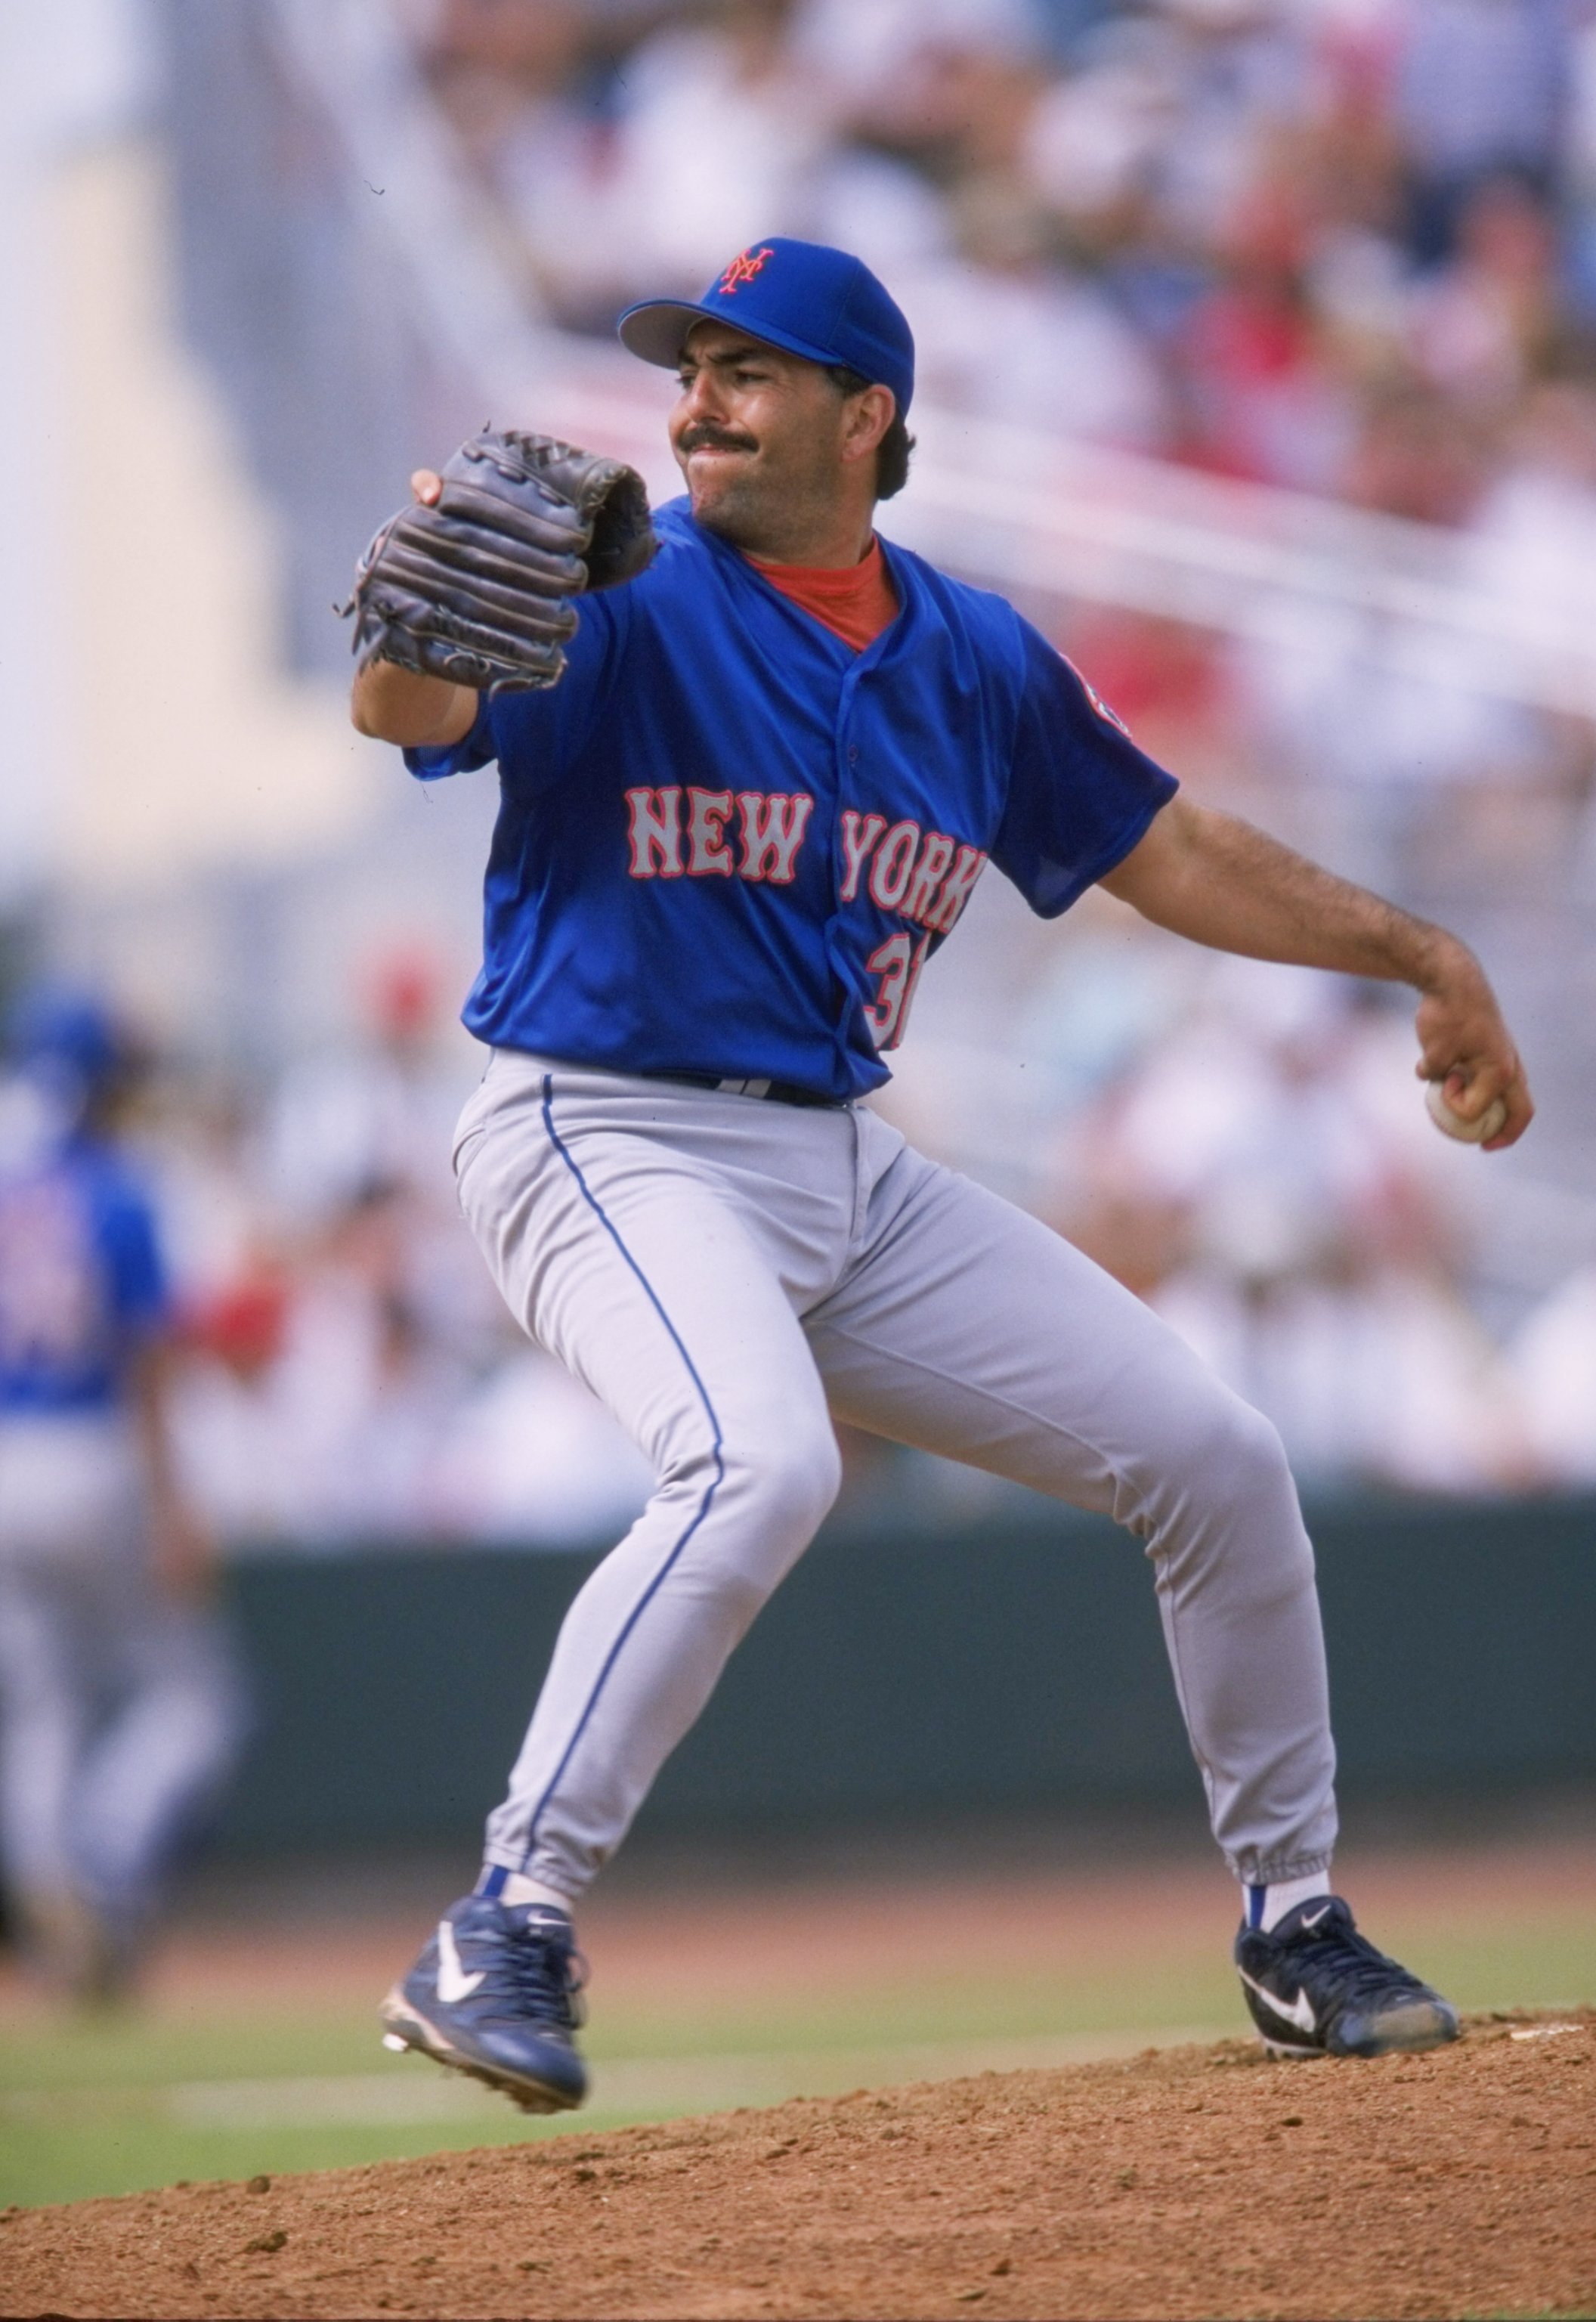 8 Mar 1998:  Pitcher John Franco of the New York Mets in action during a spring training game against the St. Louis Cardinals at the Roger Dean Stadium in Jupiter, Florida. The Mets defeated the Cardinals 5-4. Mandatory Credit: Stephen Dunn  /Allsport